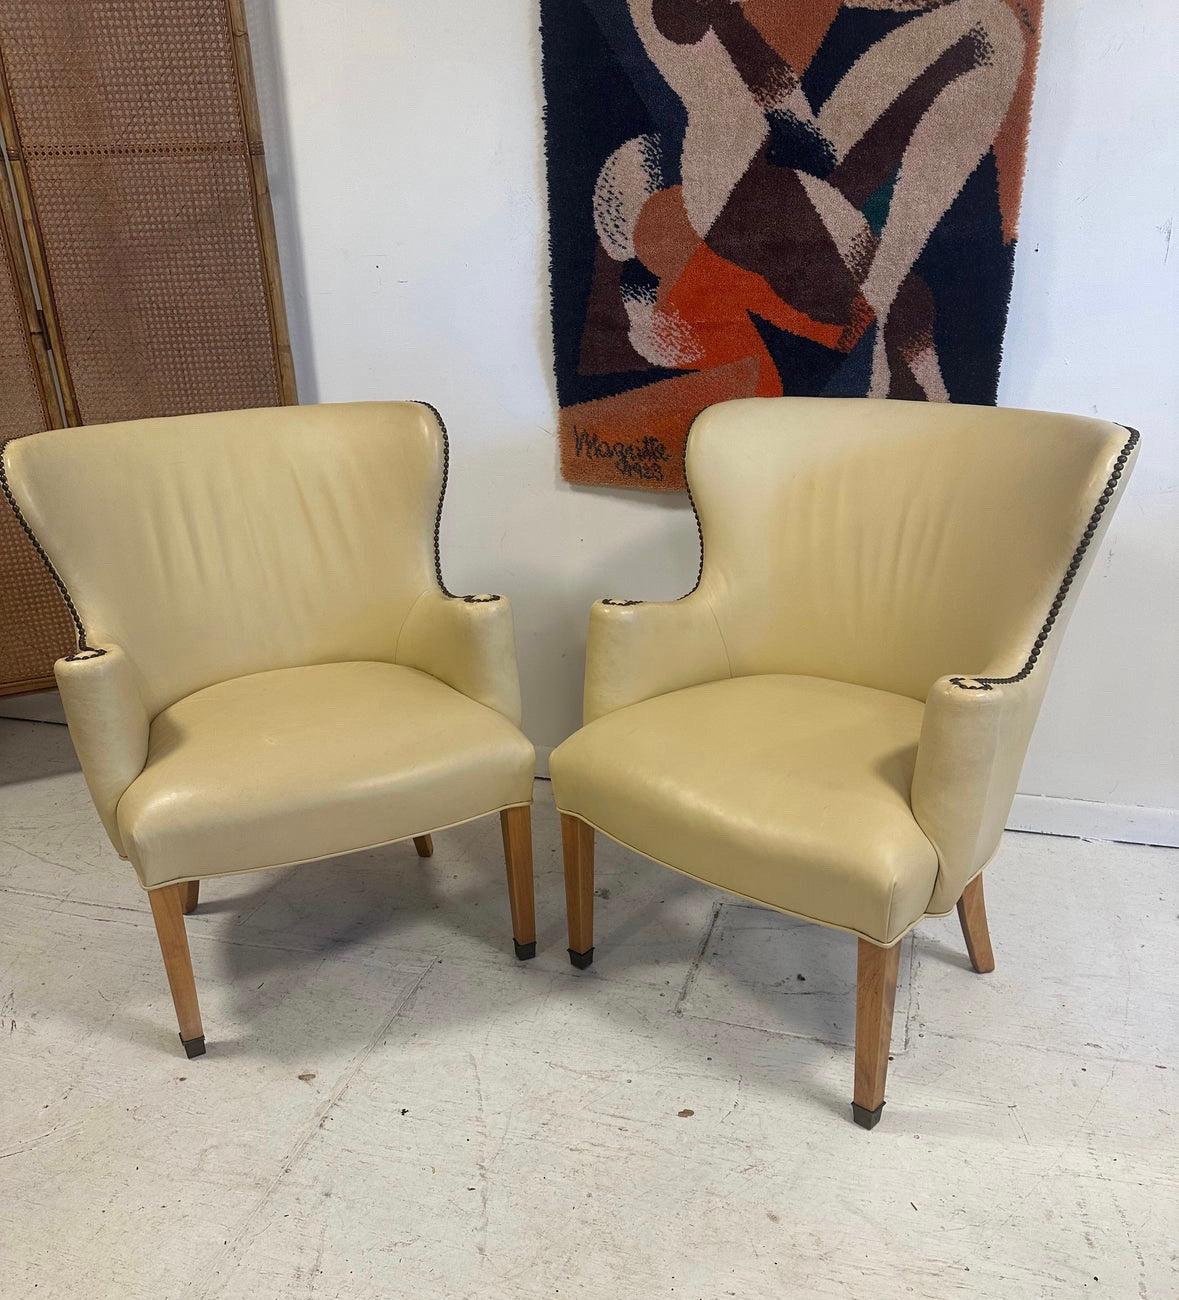 Exquisite in their condition for their age, great patina to arm rests showing their antique age, they look quite modern. From the estate of a local judge. A rare find in this condition and well looked after. 
Spring seats and supple off-white cream